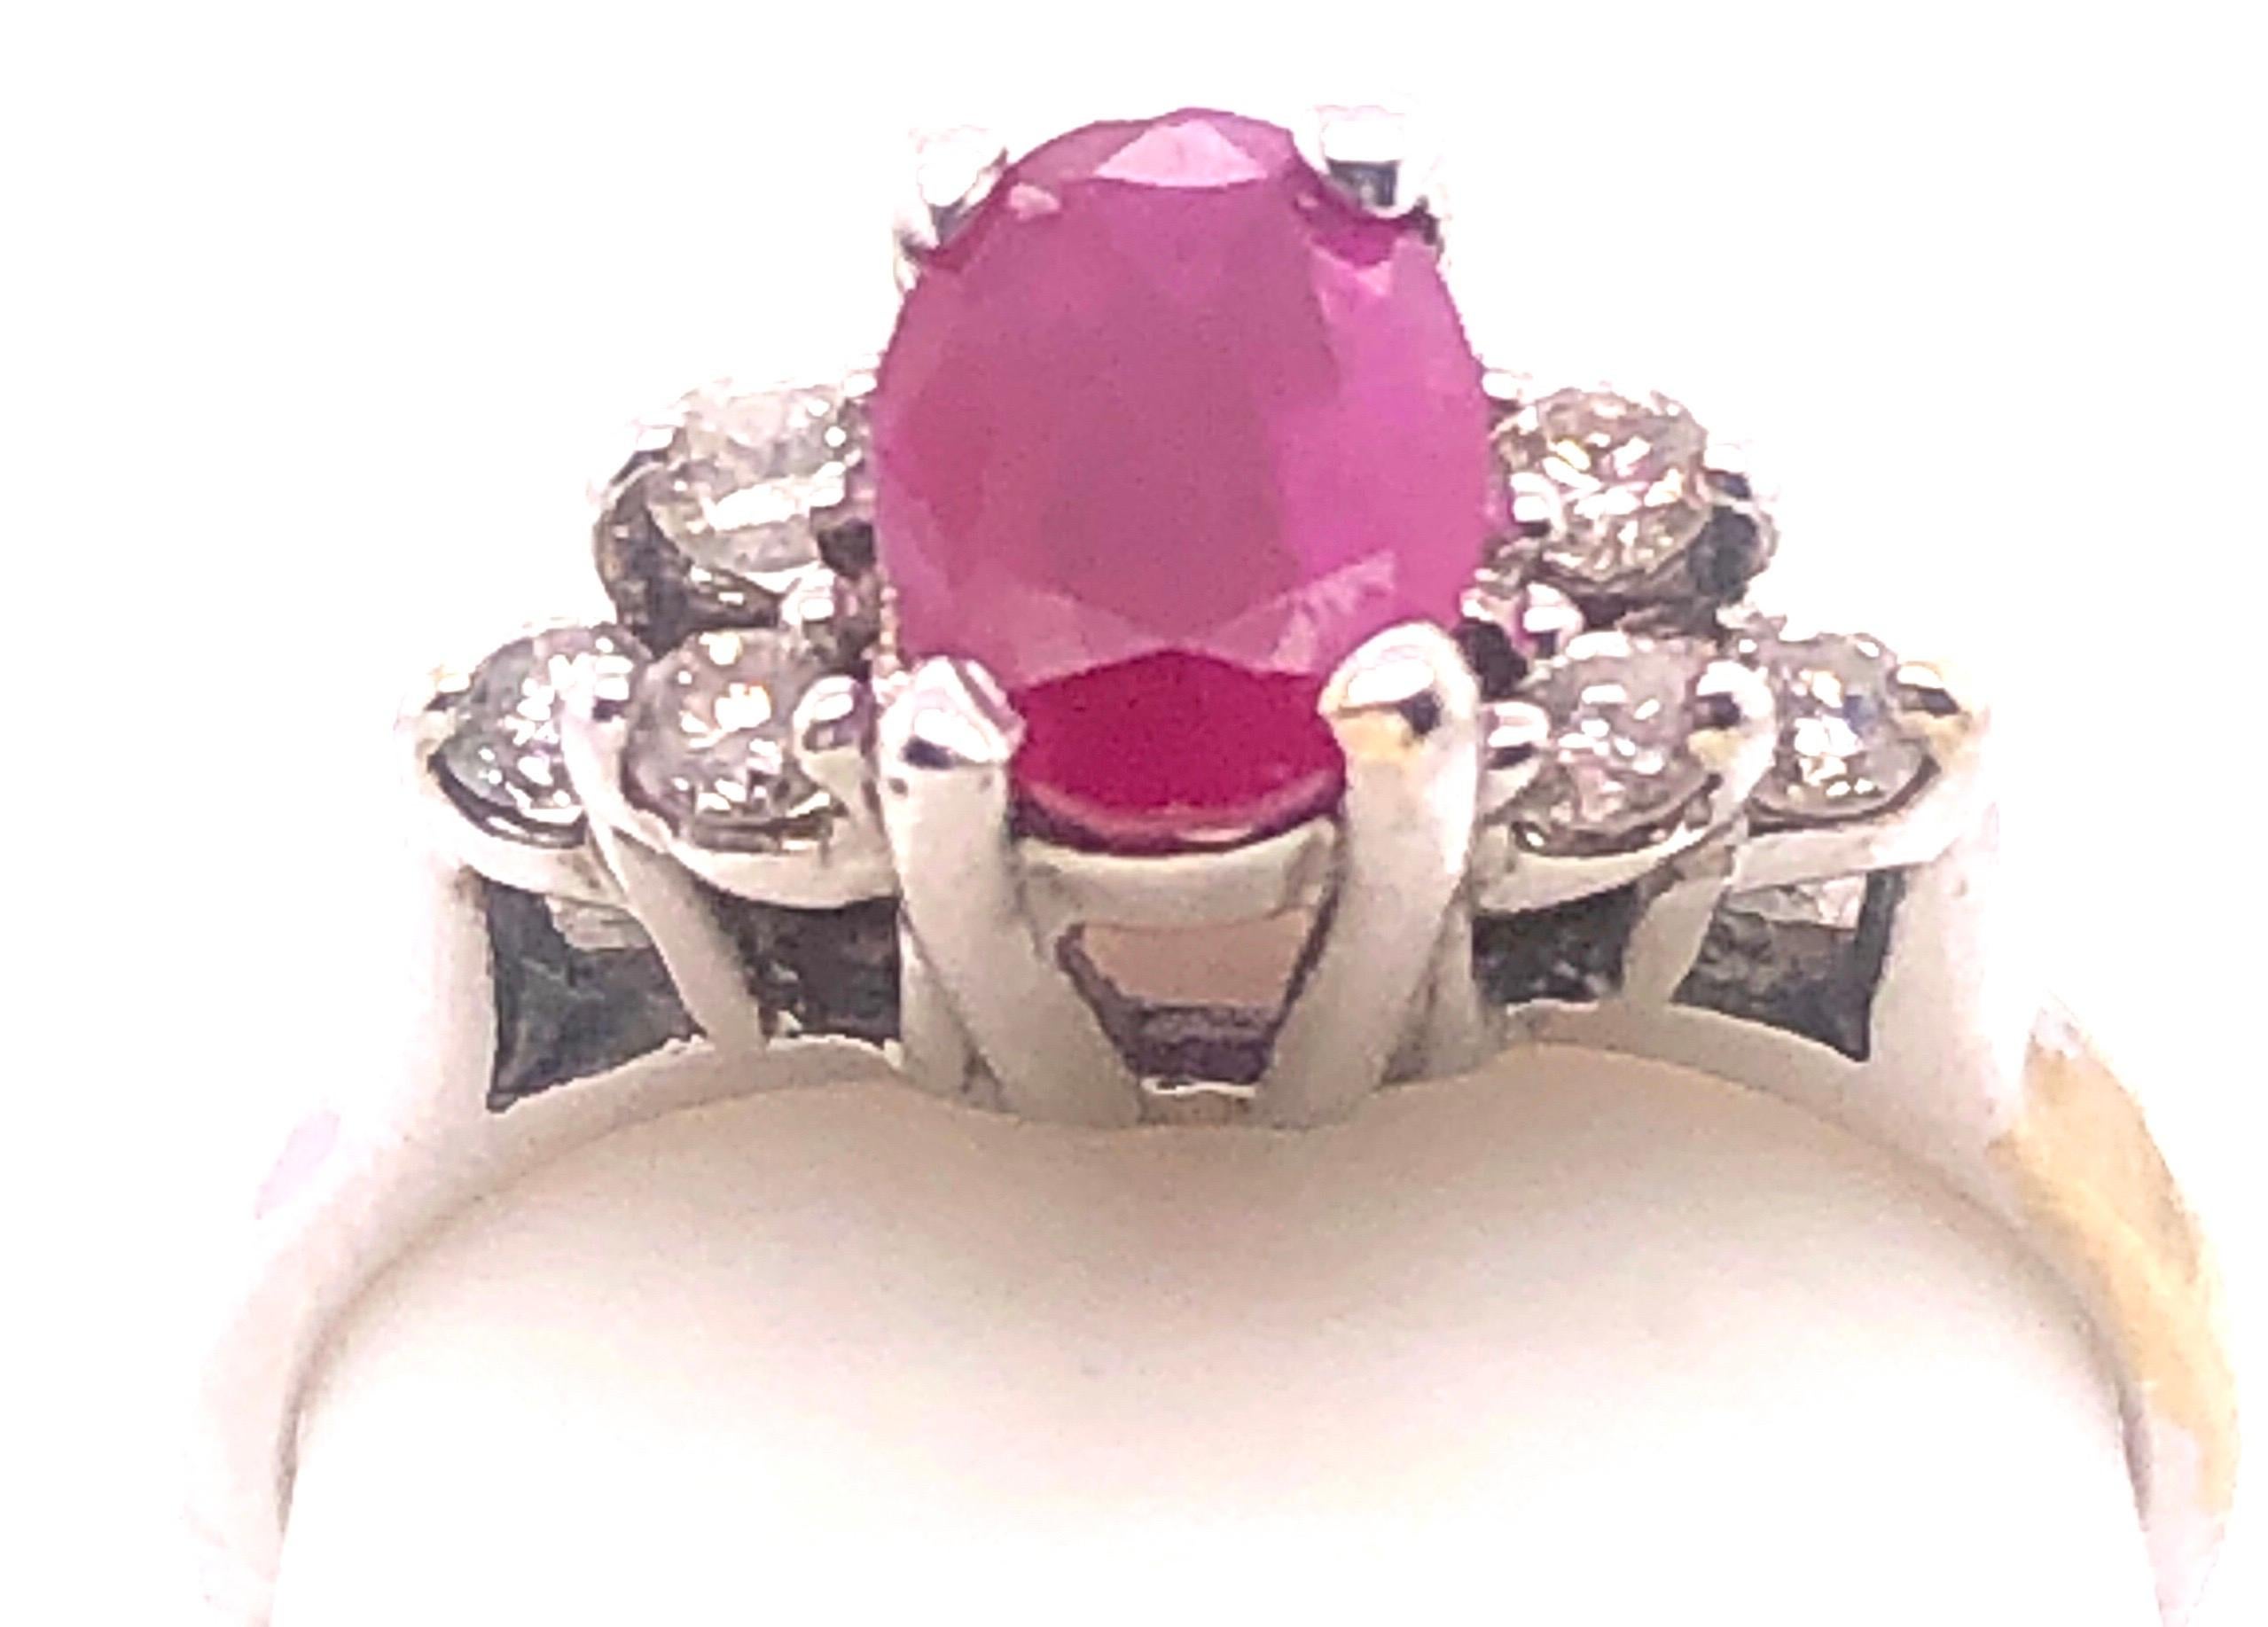 14 Karat White Gold Contemporary Ruby Ring with Round Diamonds.
Size 6.25
3.10 grams total weight.